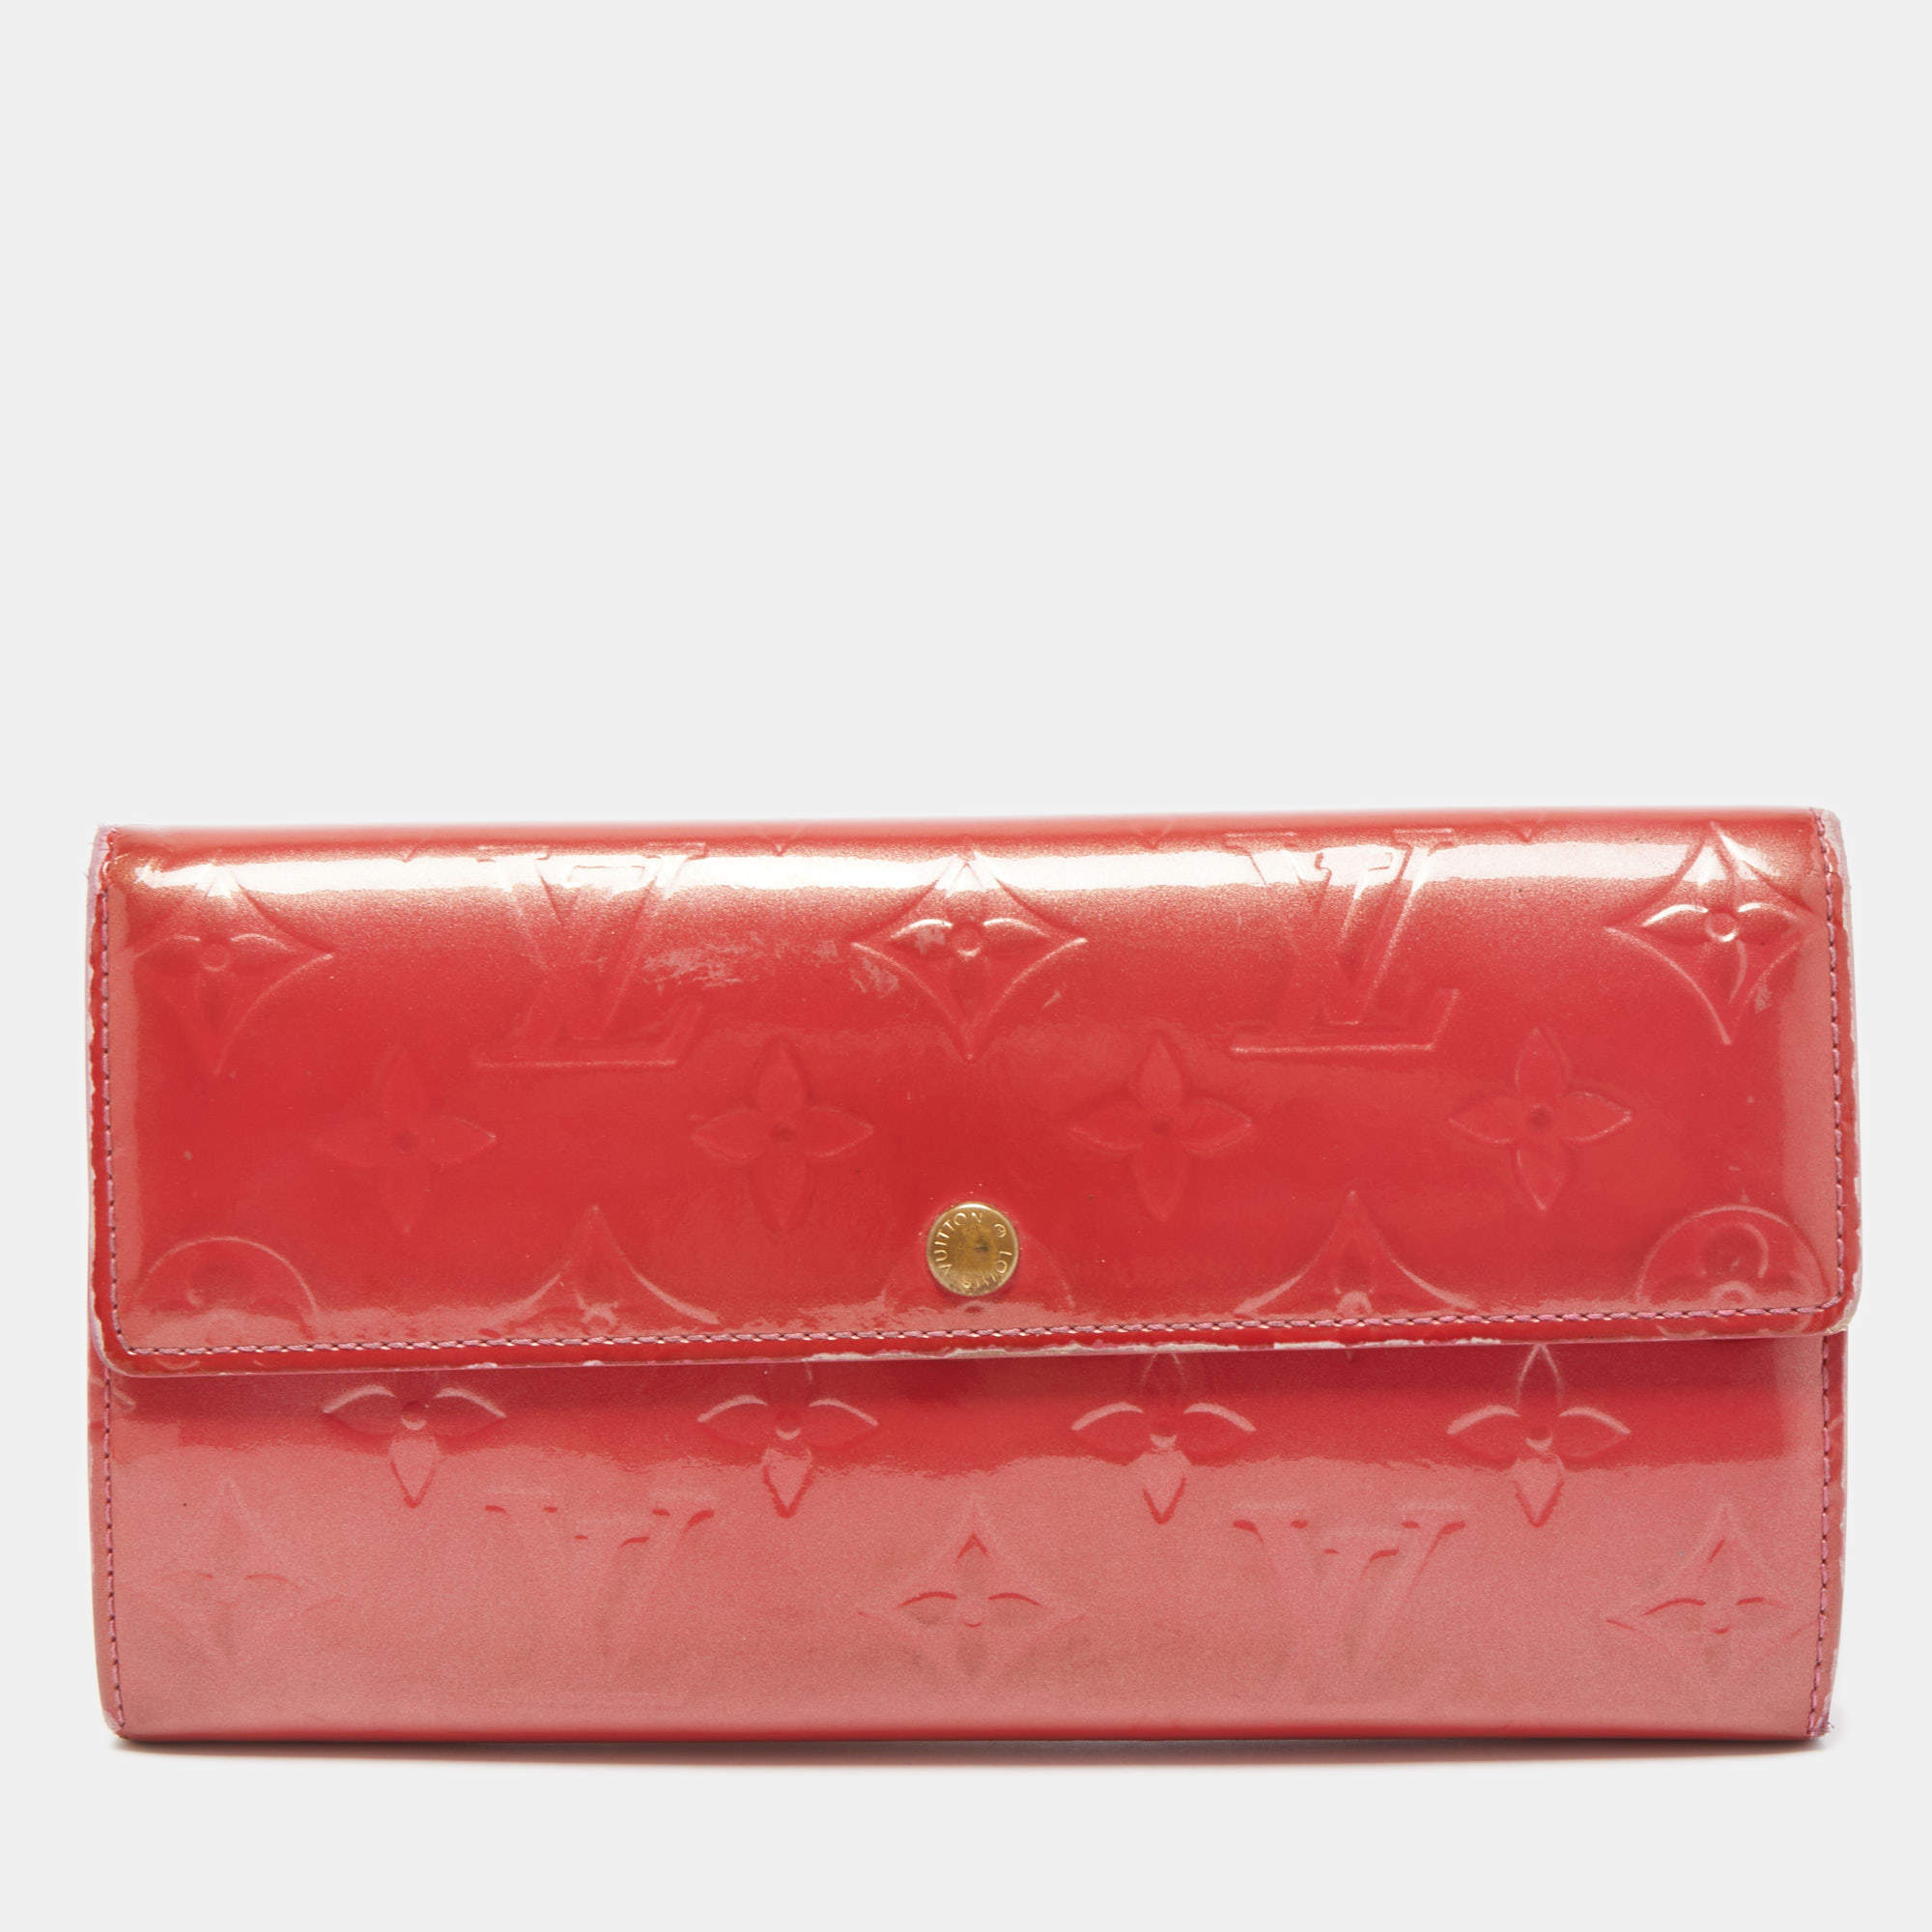 Louis Vuitton - Authenticated Sarah Wallet - Patent Leather Pink for Women, Very Good Condition